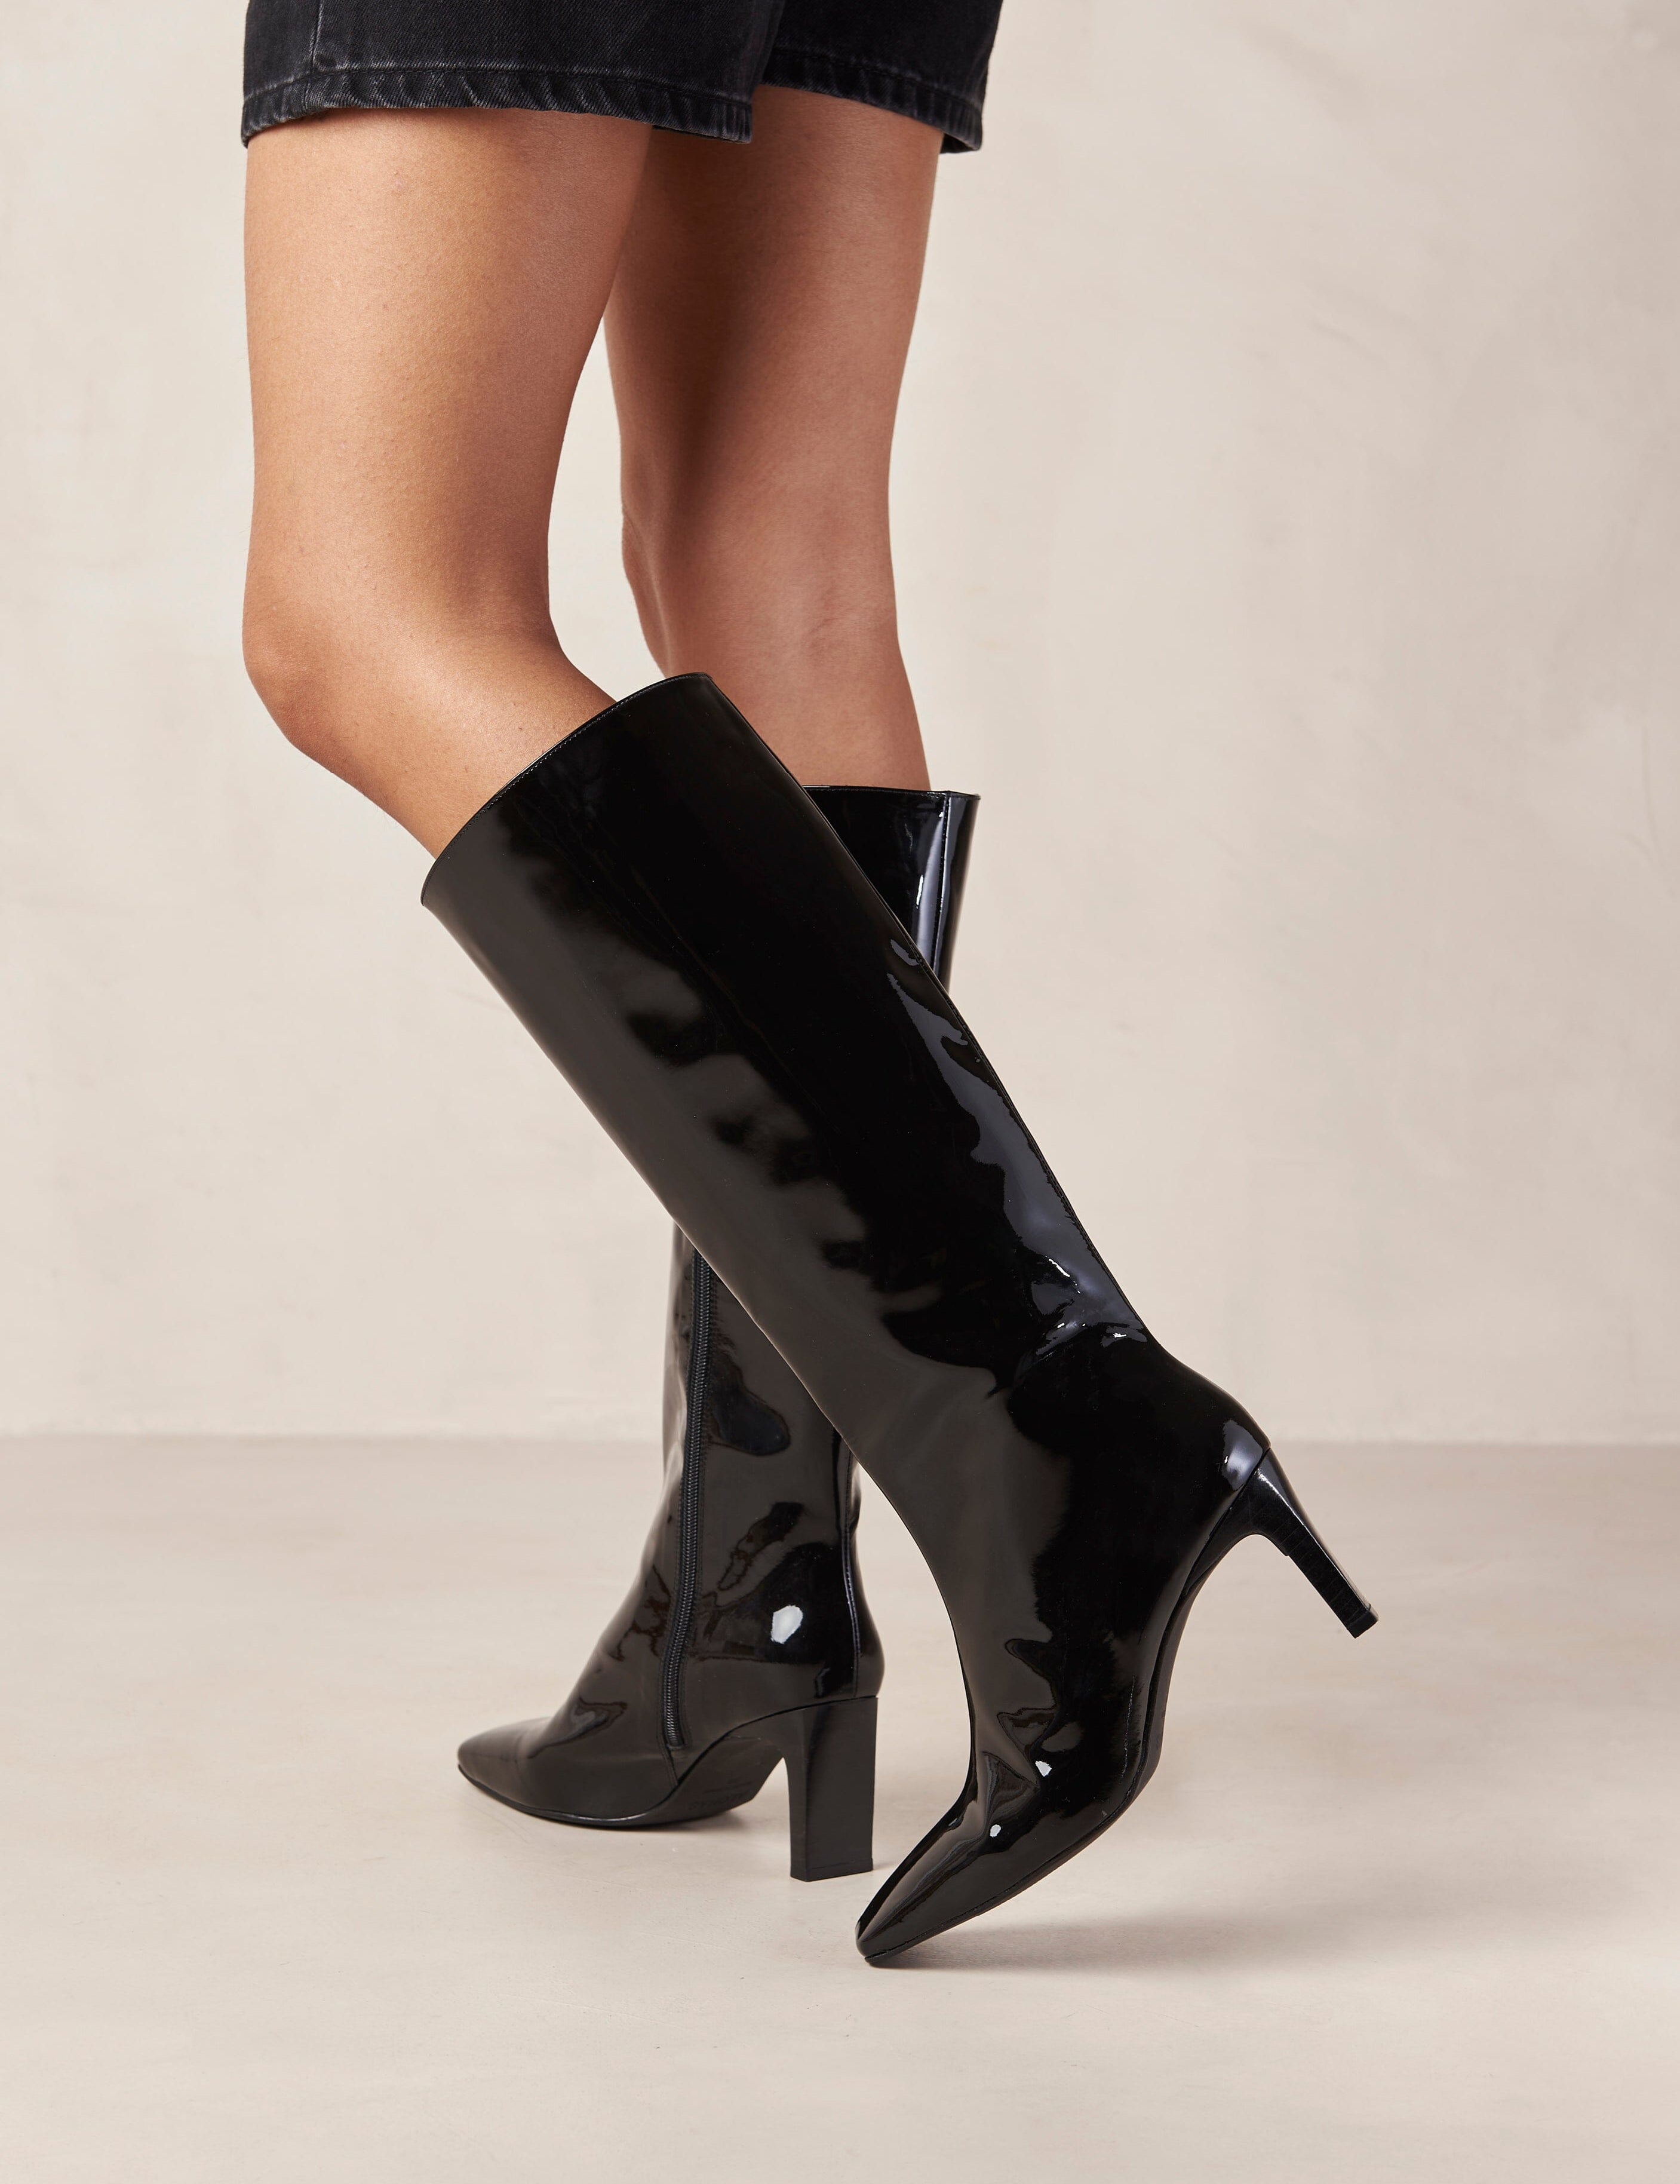 isobel-onix-black-leather-boots-boots-alohas-308256_3000x_35f5dfff-f8af-4155-88d0-0fd469385613.jpg